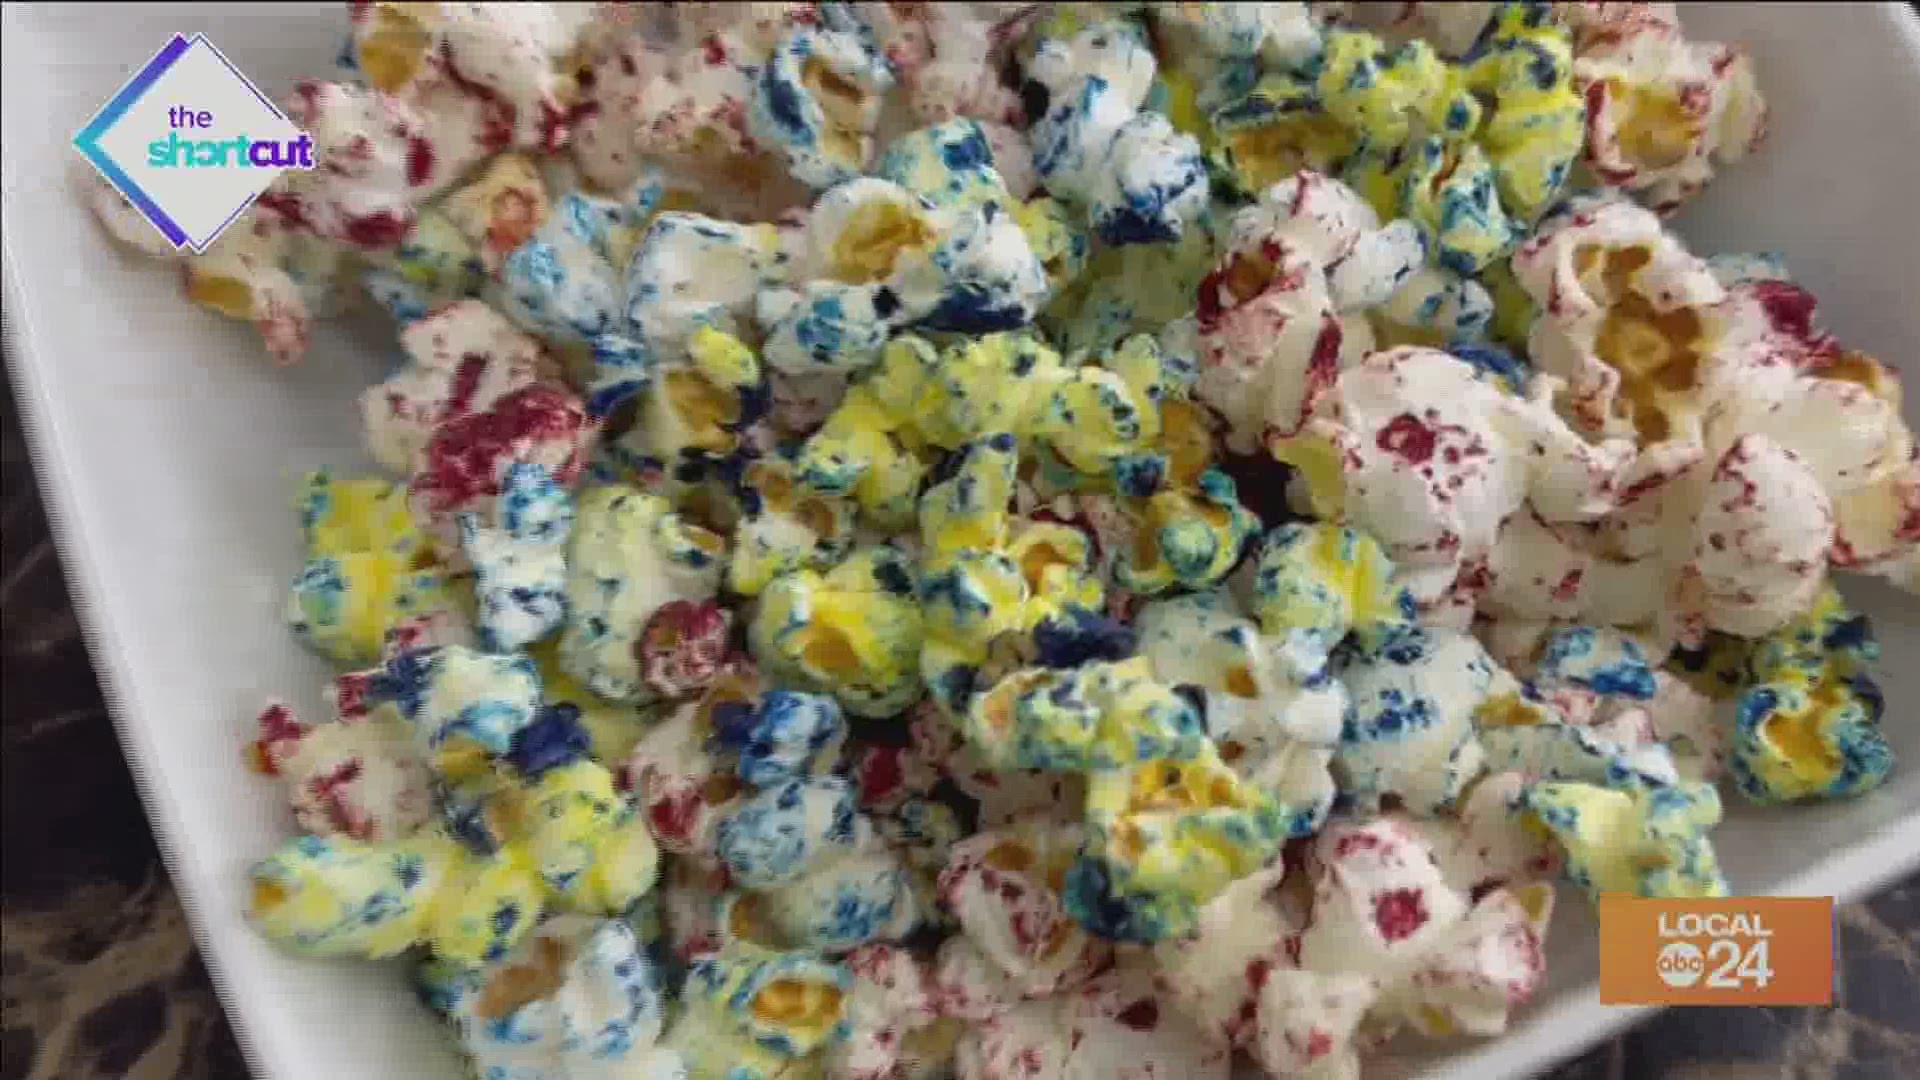 Using only a bag of popped popcorn and red and blue food coloring, this easy, last-minute 4th of July party snack will be sure to add some spark to your table!